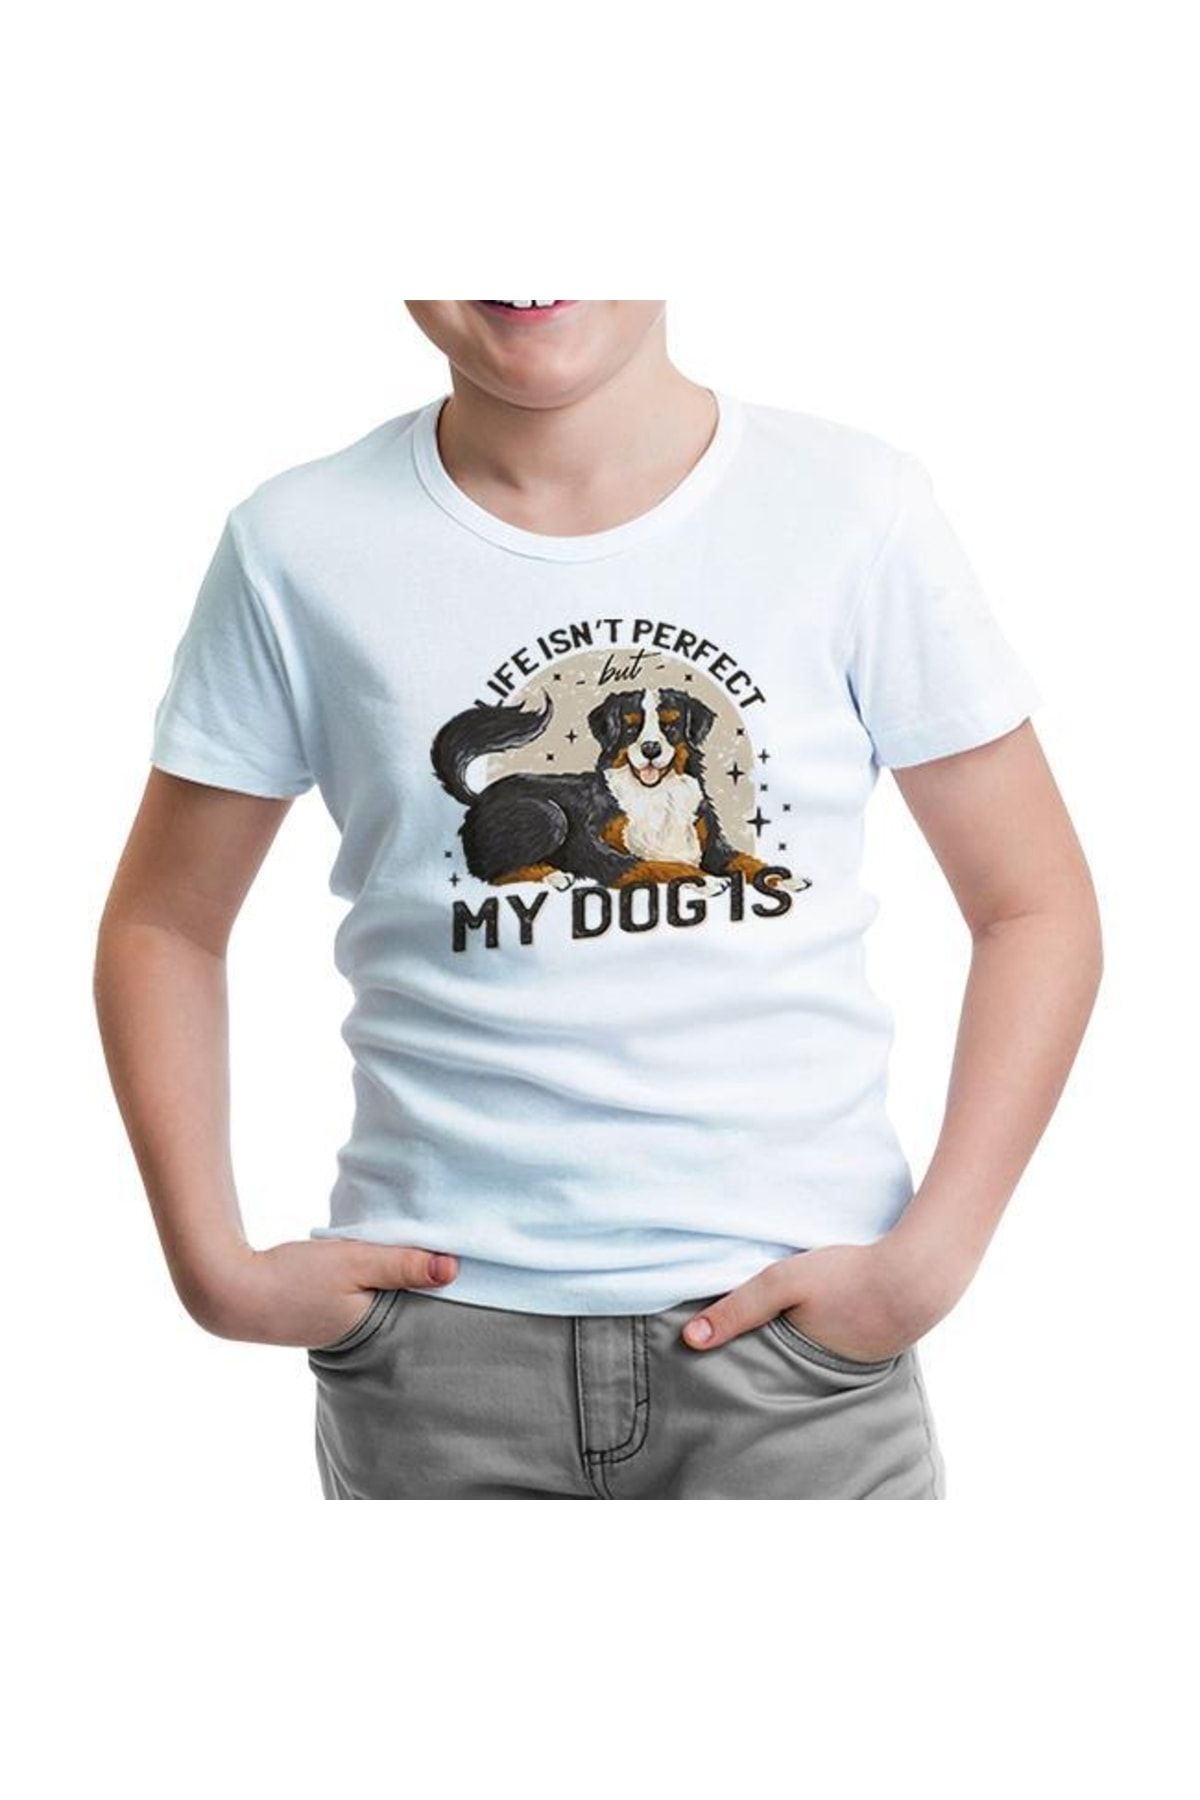 Lord T-Shirt A Dog With The Perfect Quote Beyaz Çocuk Tshirt